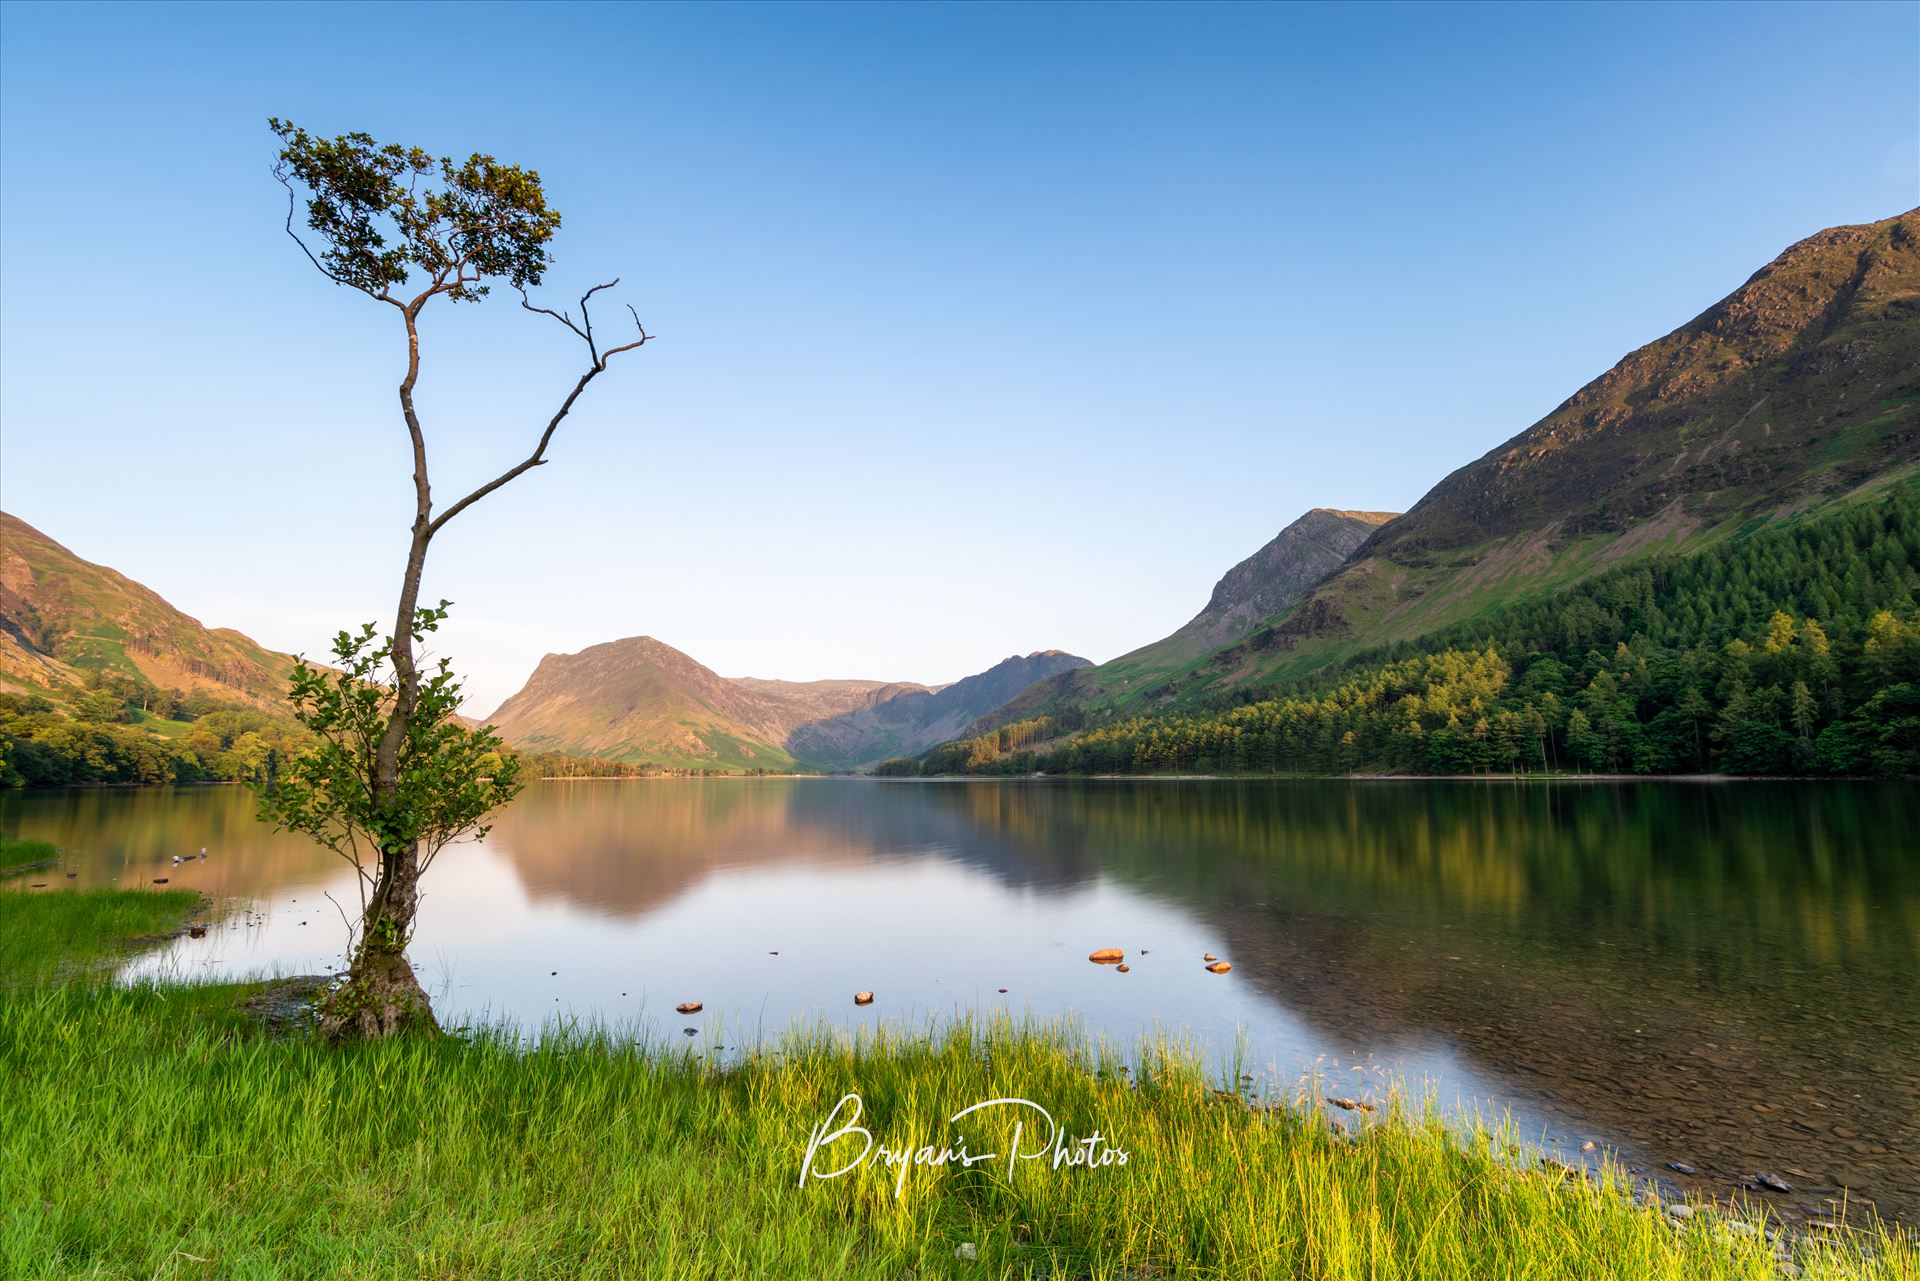 Loan Tree at Buttermere A photograph of the loan tree at Buttermere Lake in the Lake District. by Bryans Photos